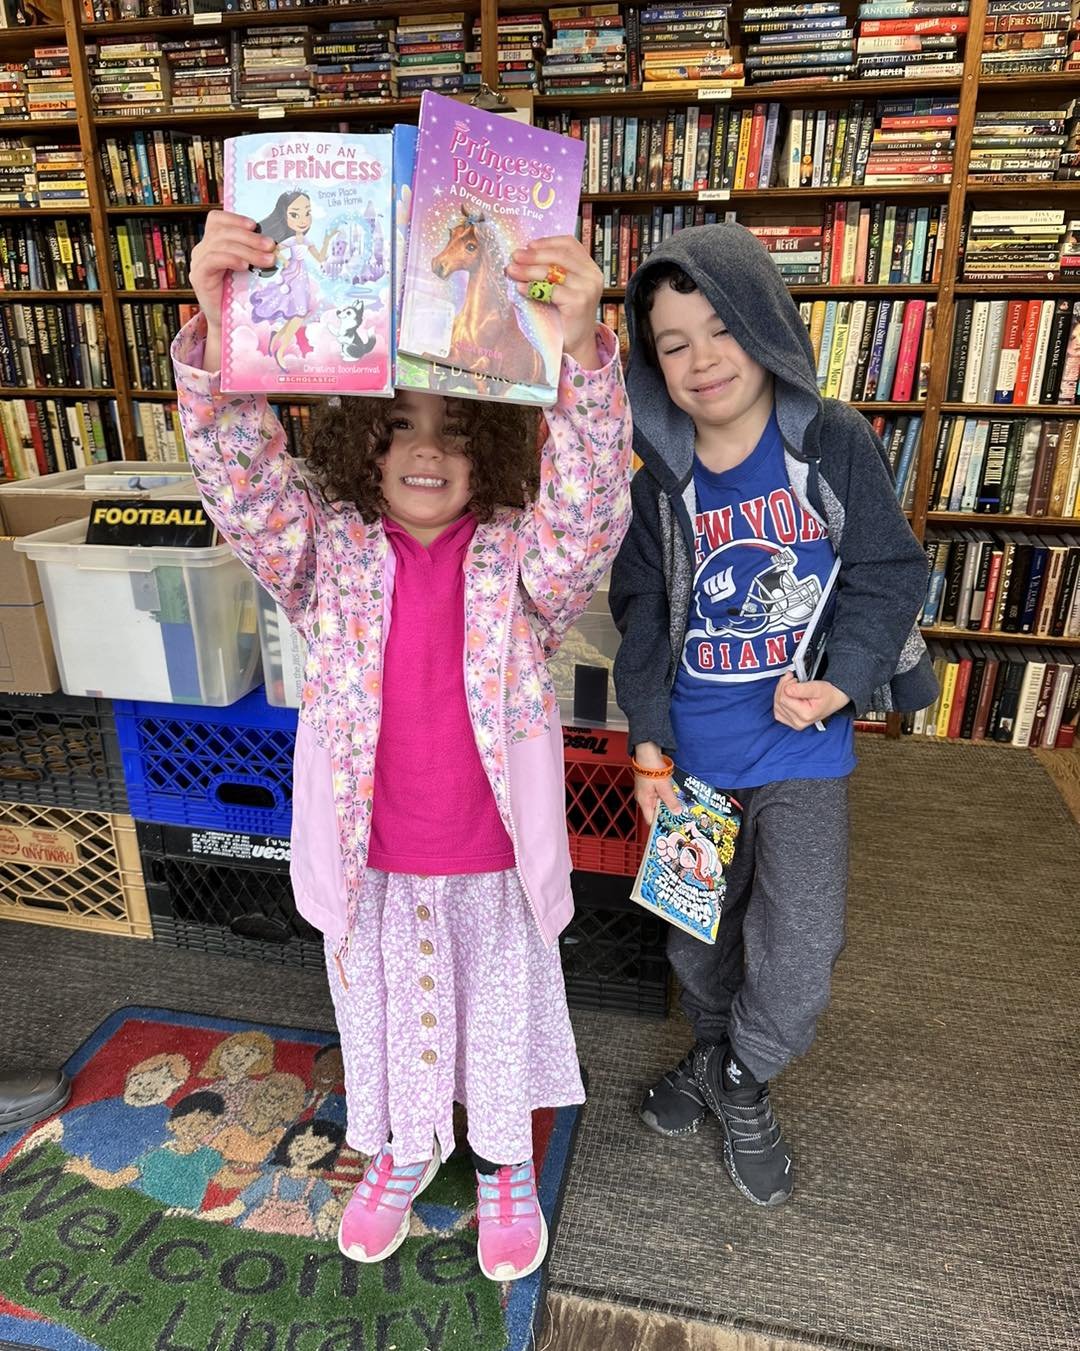 Hailey and Noah selecting some books.